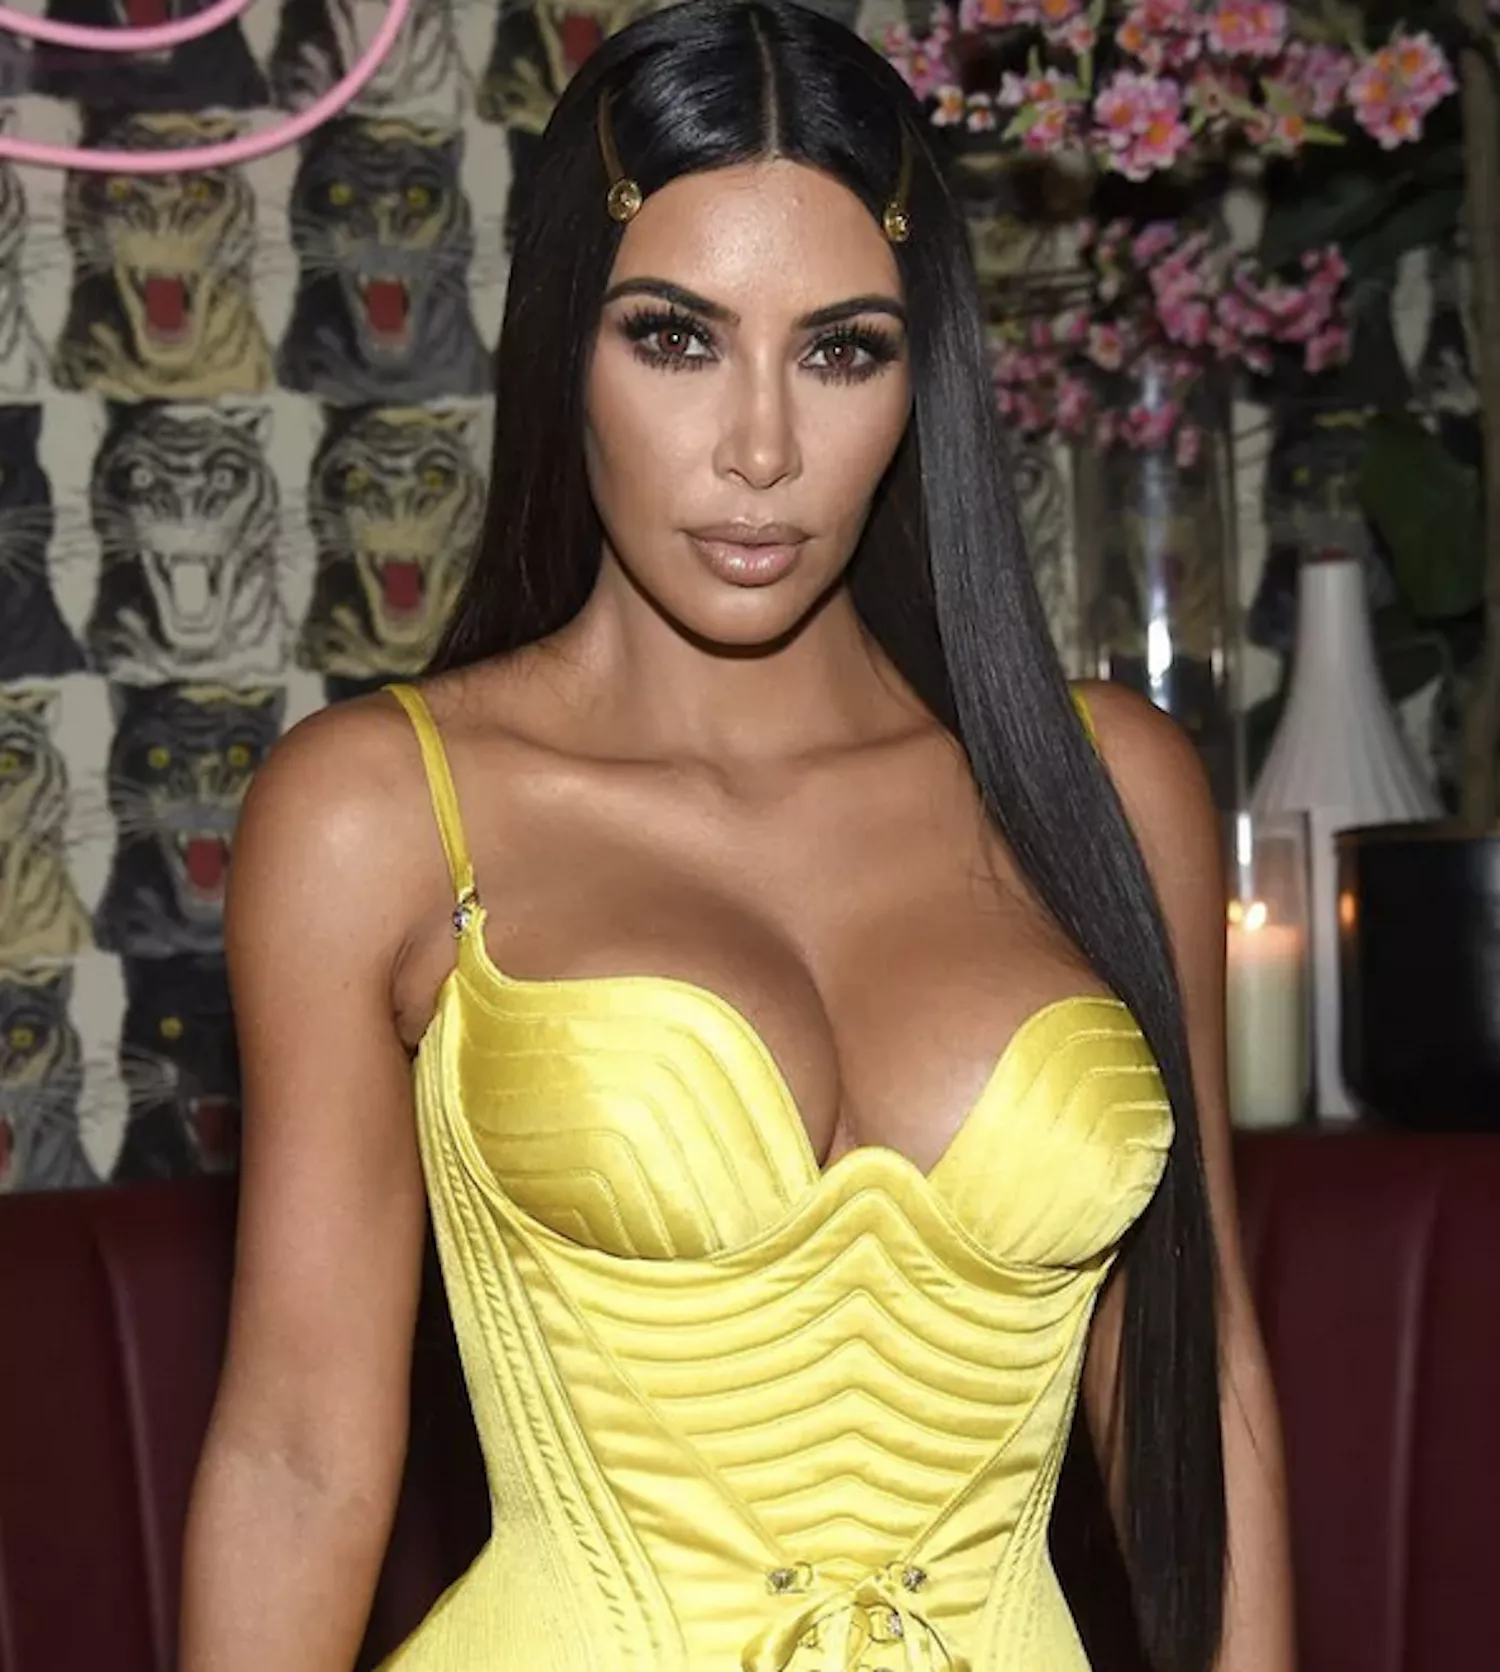 Kim Kardashian's Greatest Hair Moments: Sleek and Straight Pinned Back With Barrettes